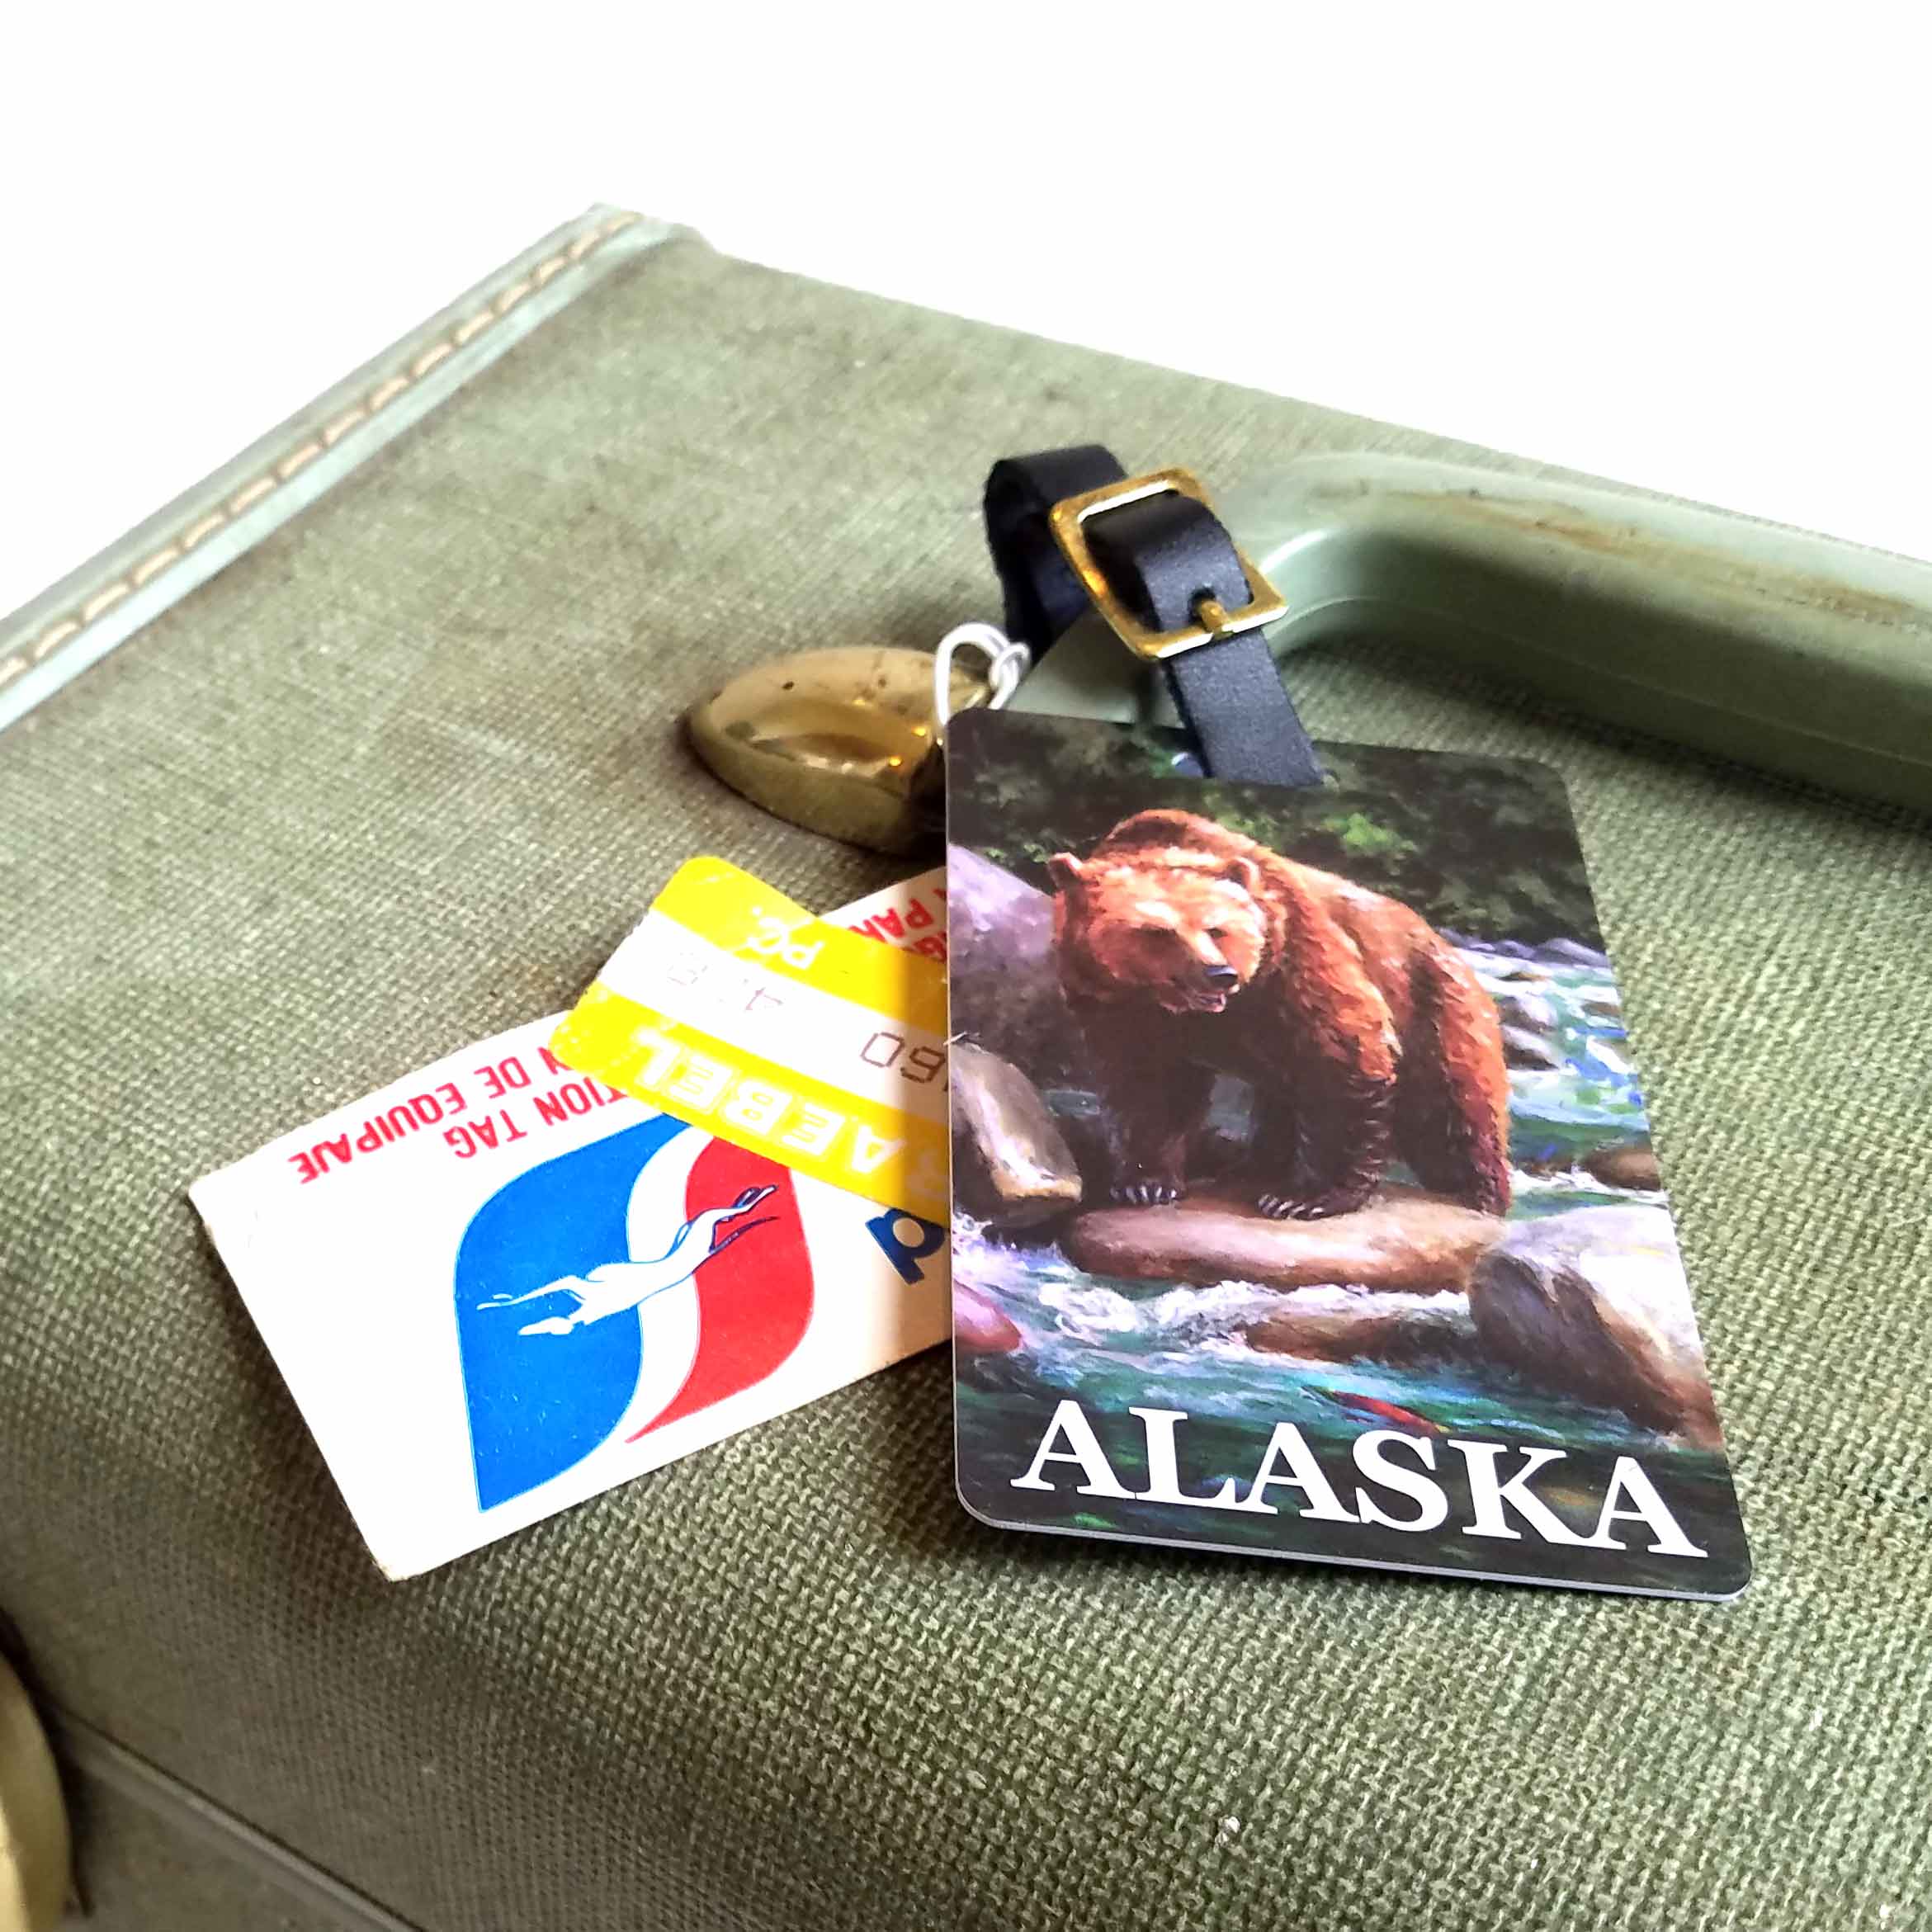 An Alaska luggage tag rests on a vintage suitcase with other tourist and travel tags. The luggage tag depicts a brown bear and features a leather buckle strap.